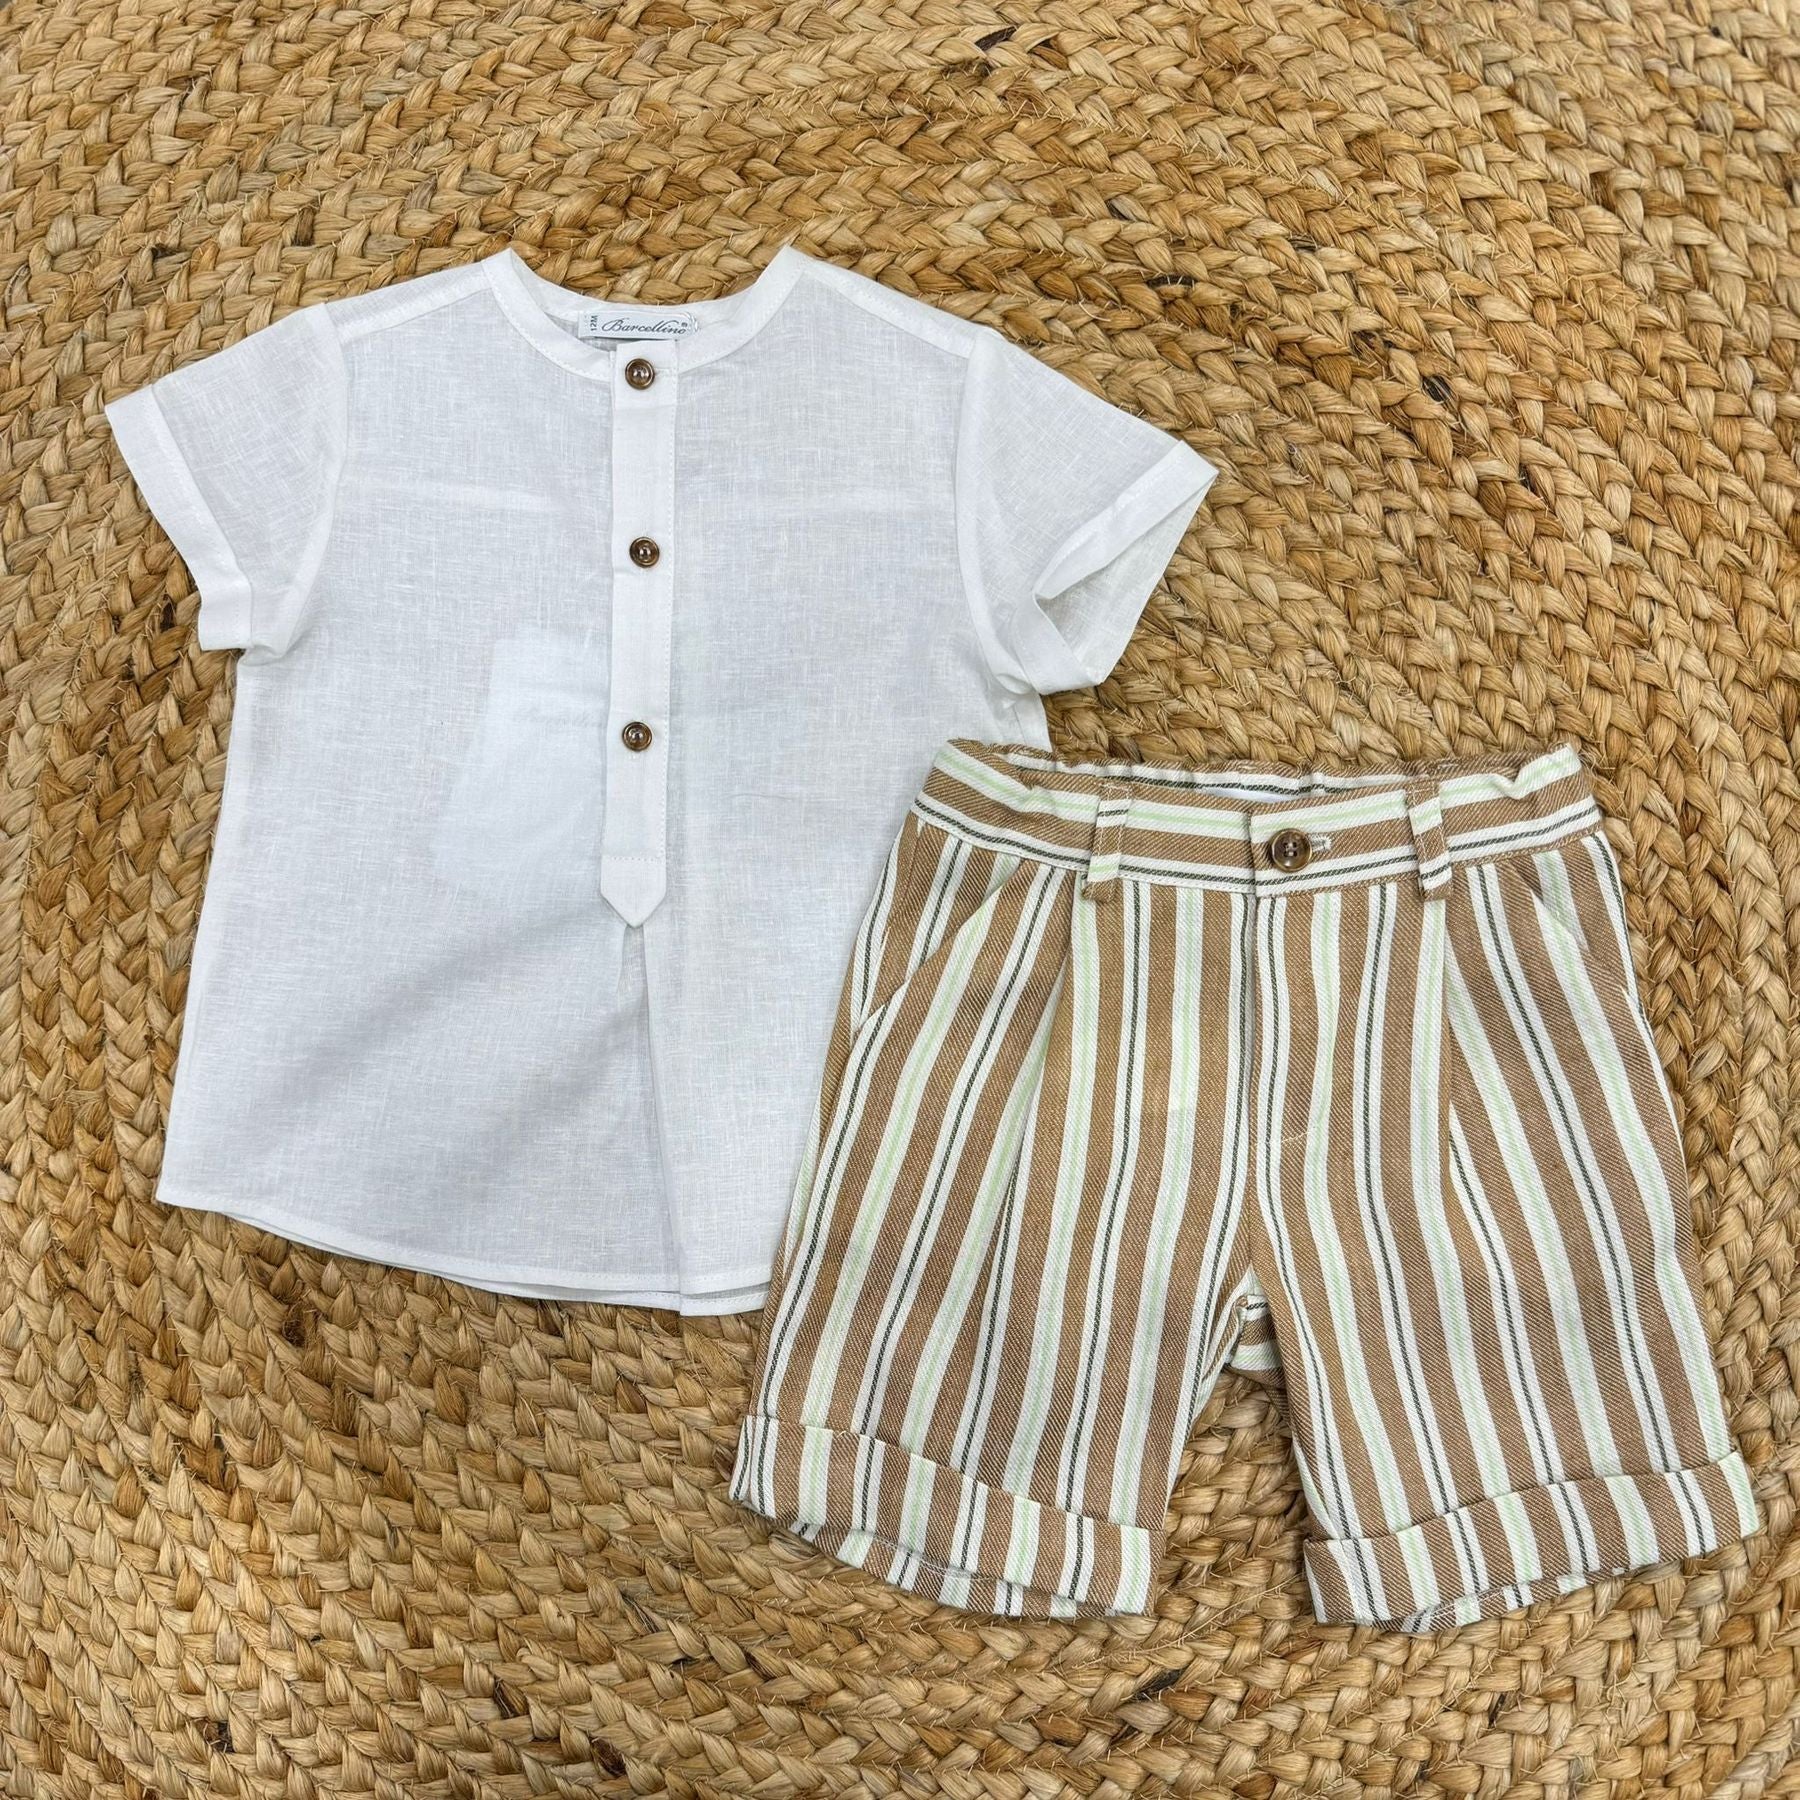 Barcellino Striped shirt and shorts